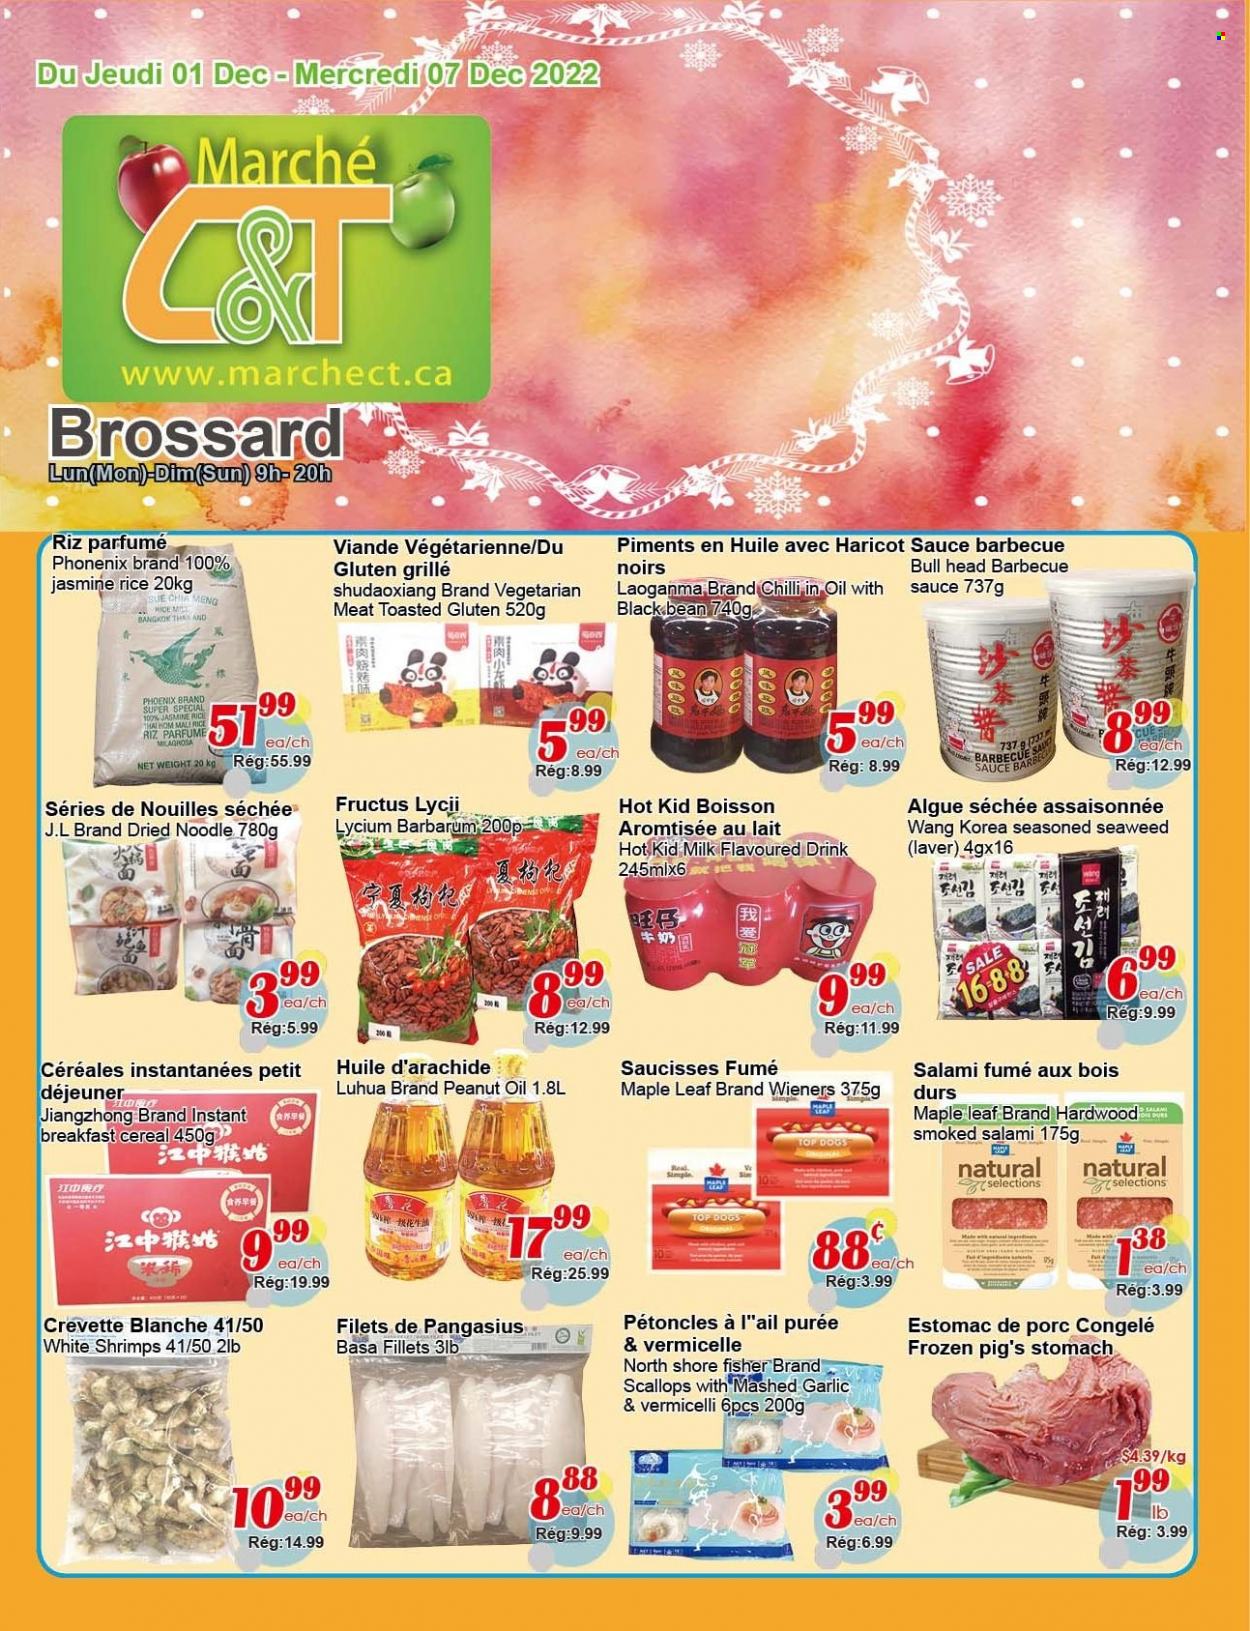 thumbnail - Marché C&T Flyer - December 01, 2022 - December 07, 2022 - Sales products - scallops, pangasius, shrimps, noodles, salami, milk, seaweed, cereals, rice, jasmine rice, spice, BBQ sauce, peanut oil, Laoganma. Page 1.